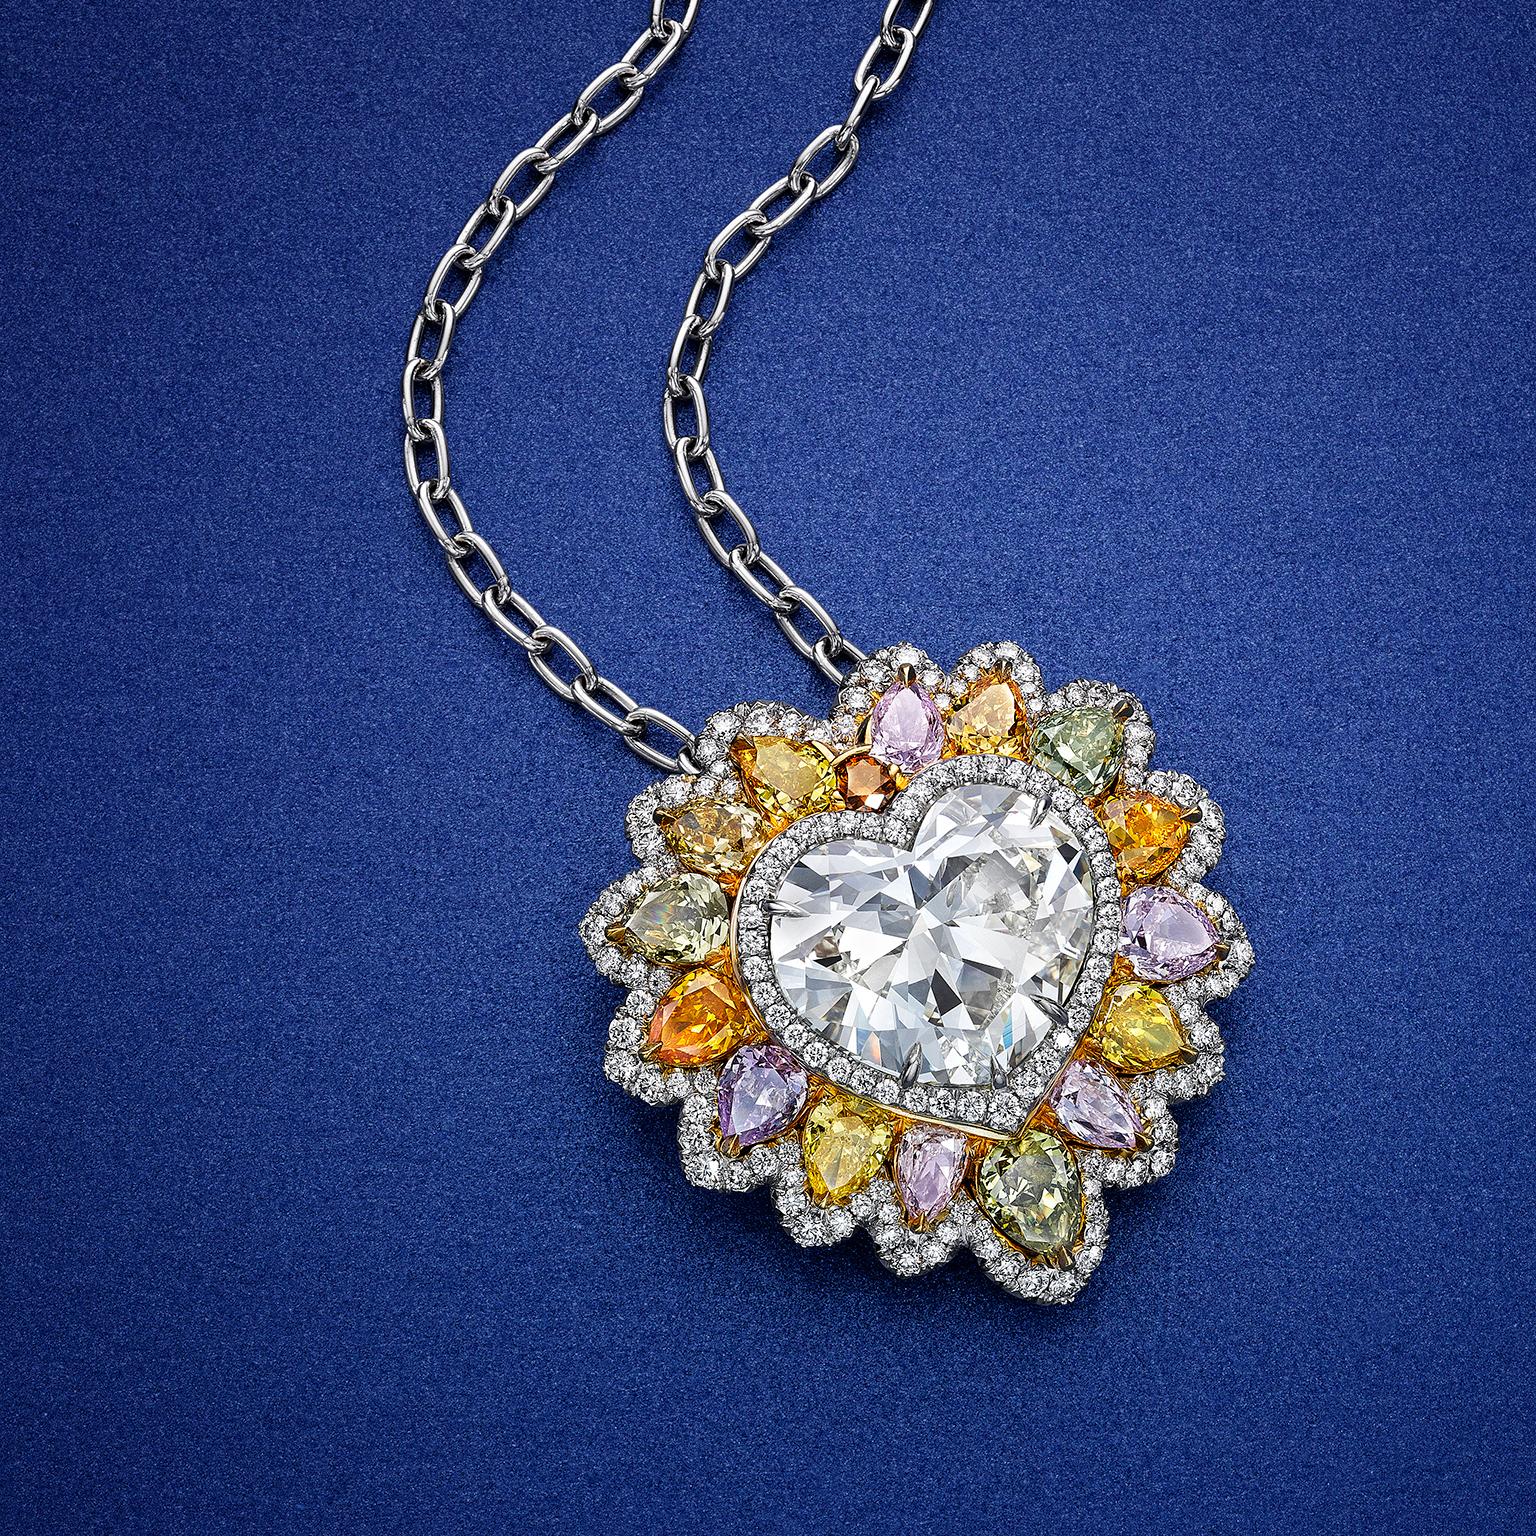 Rare and well-crafted pendant necklace showcasing a GIA certified 10.02 carat heart shape diamond, set in a beautiful and colorful lion's mane halo made in different color diamonds. Finished with a single row of round brilliant diamonds on the edge